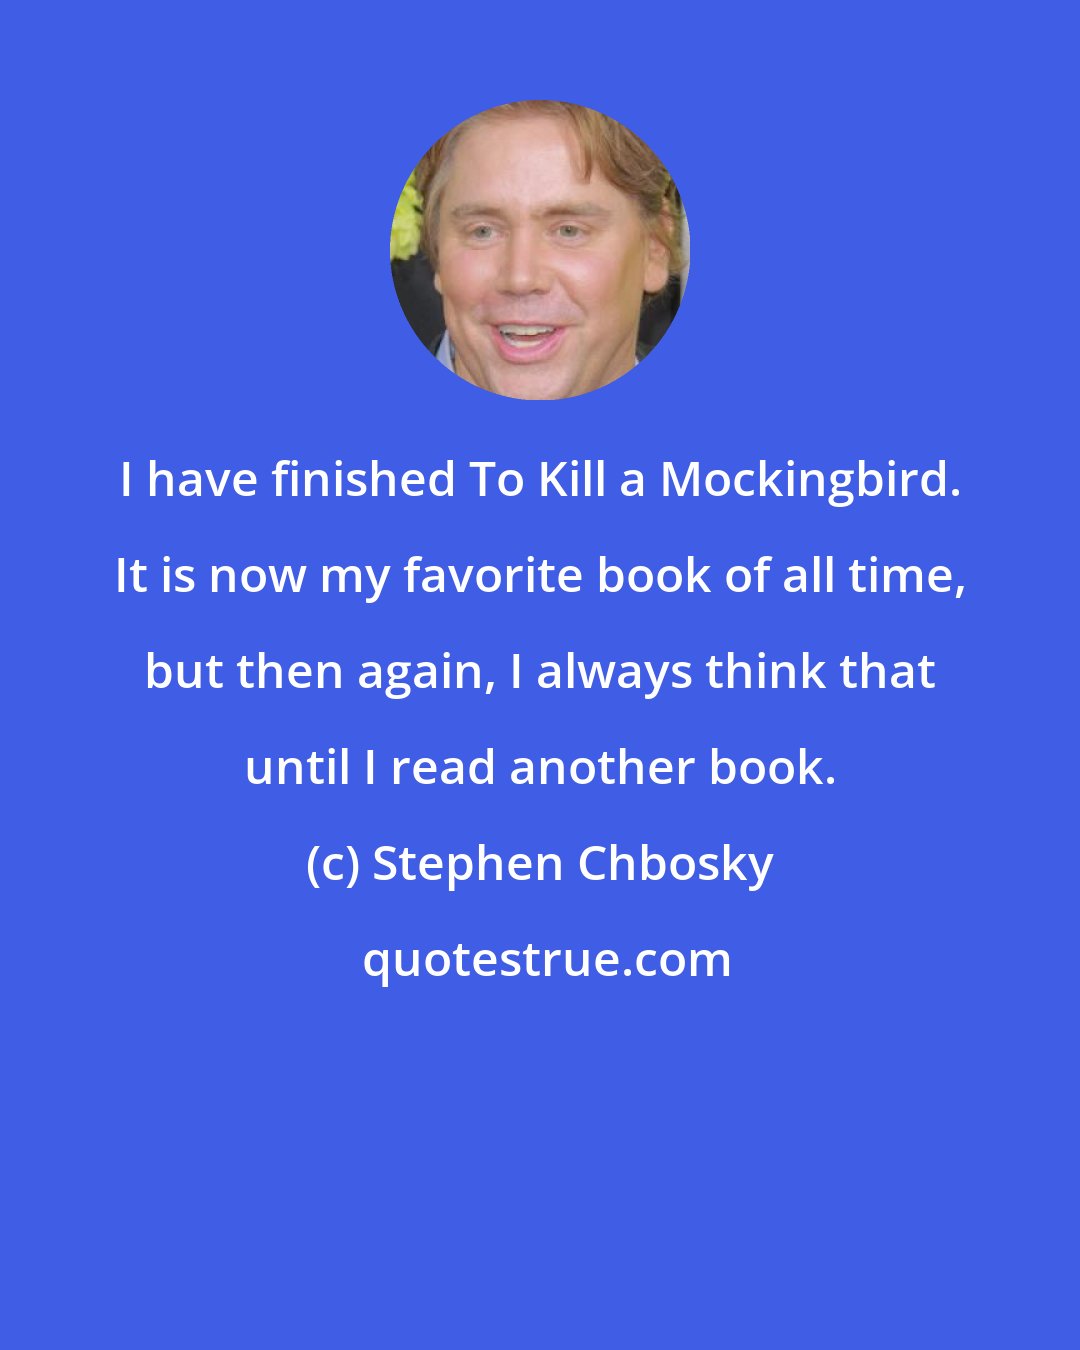 Stephen Chbosky: I have finished To Kill a Mockingbird. It is now my favorite book of all time, but then again, I always think that until I read another book.